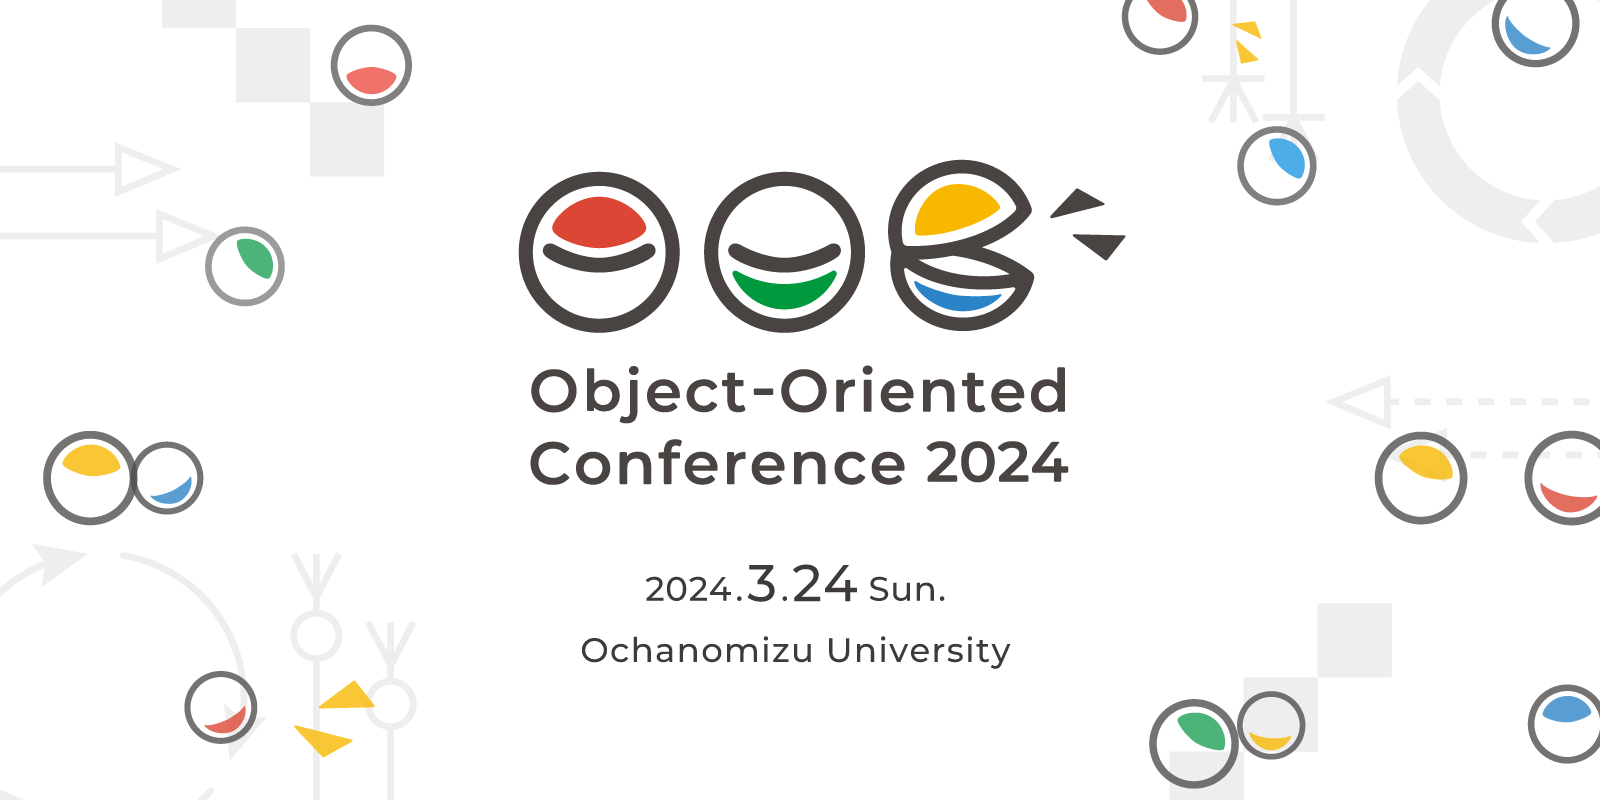 Object-Oriented Conference 2024 banner